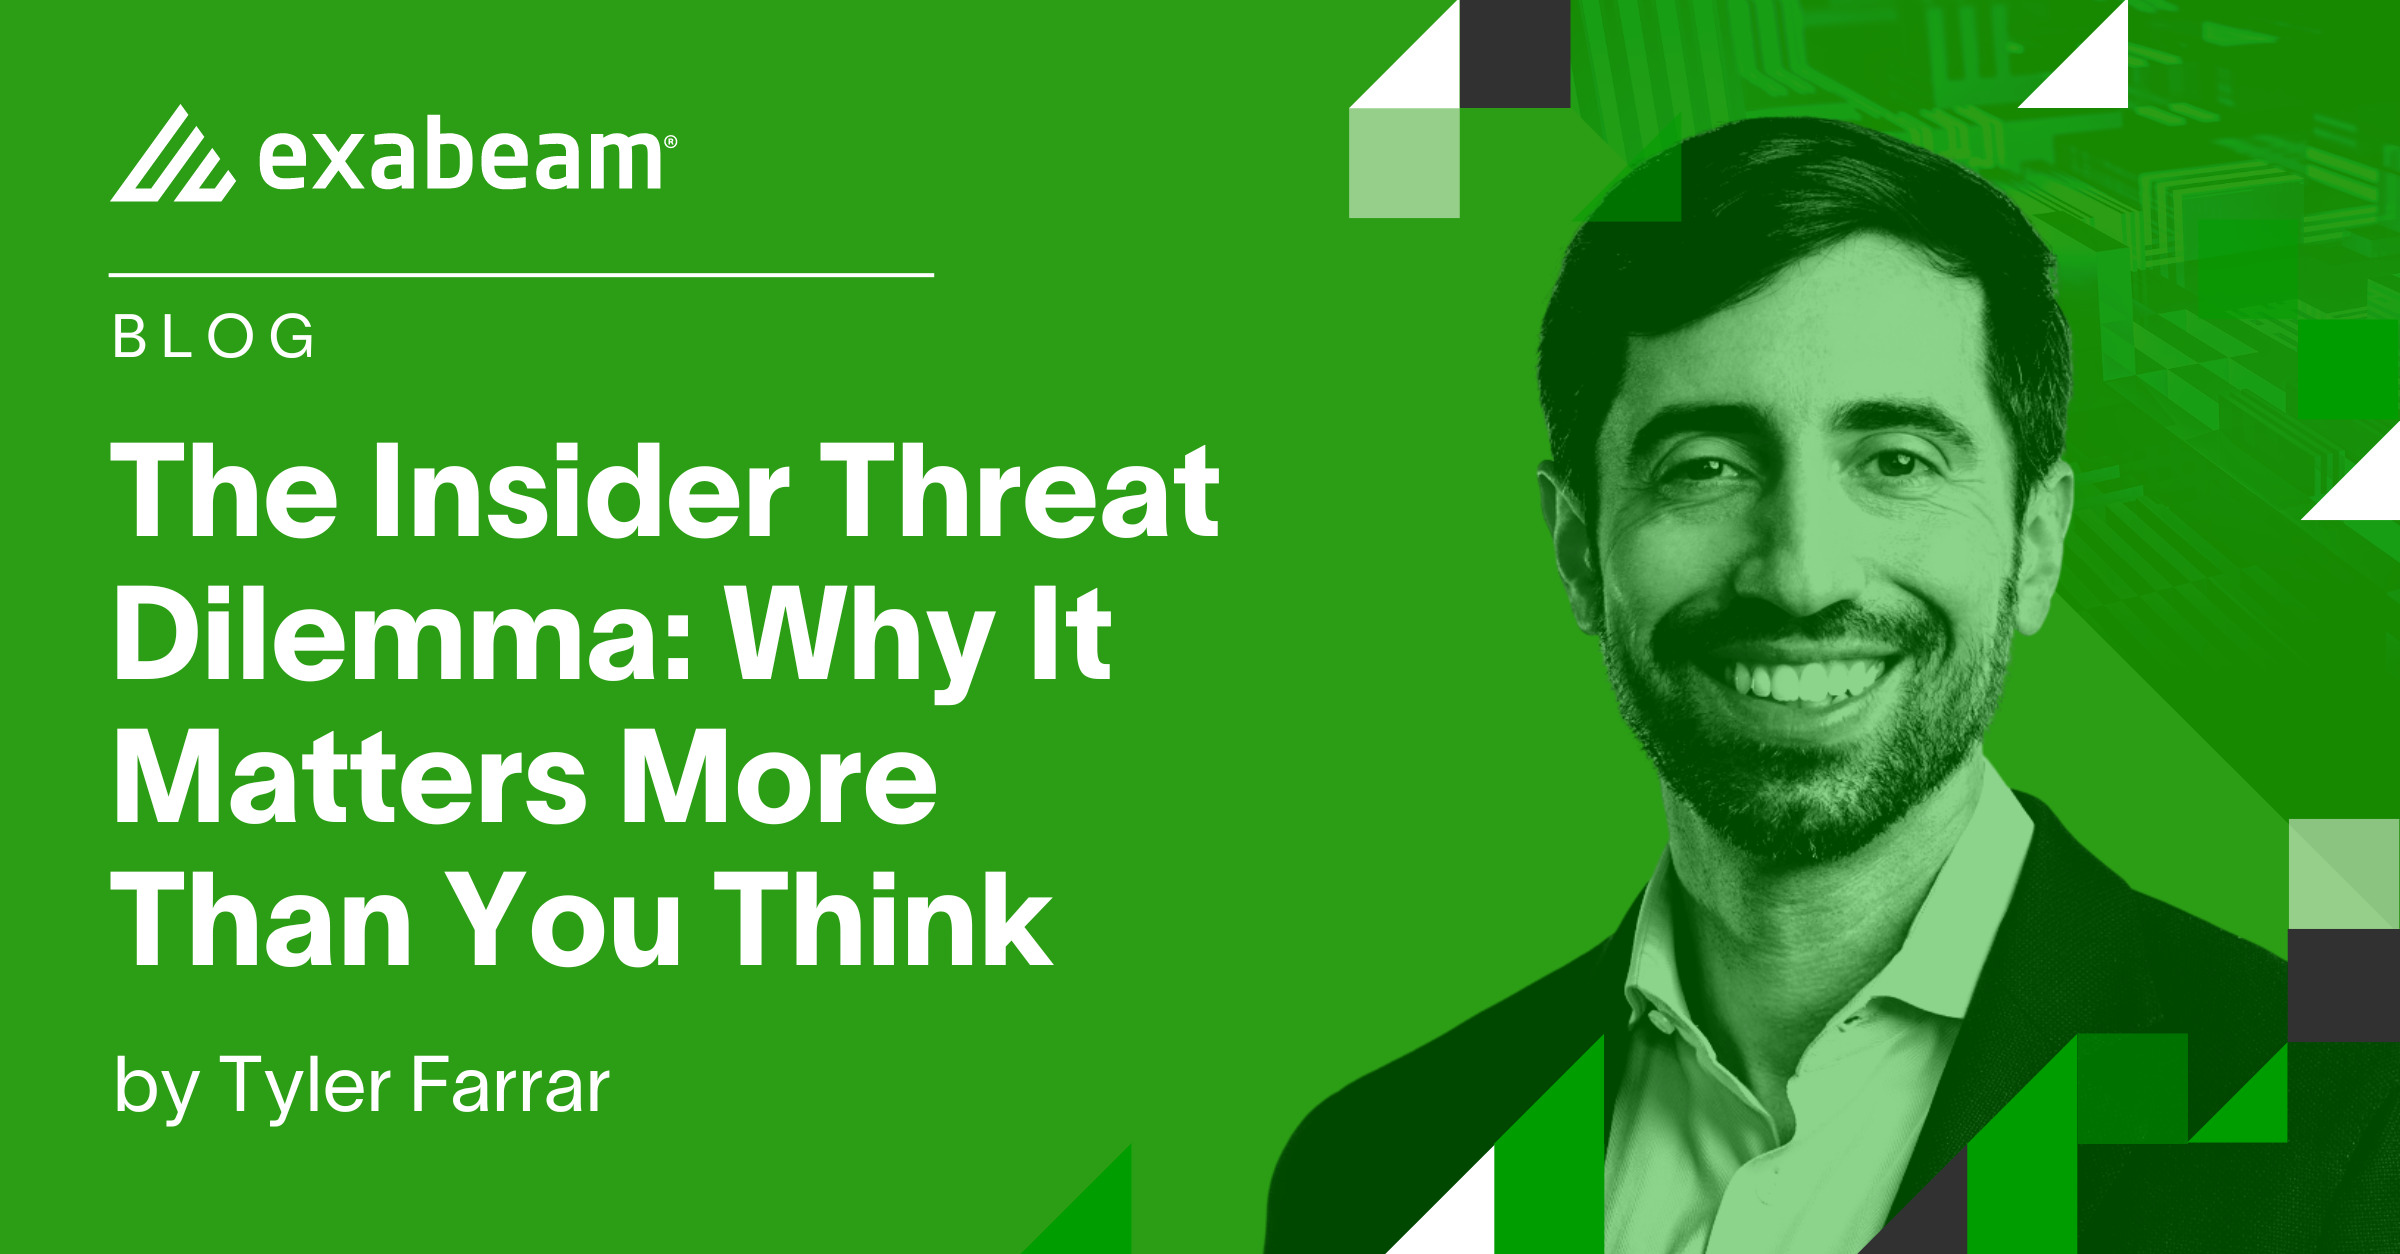 The Insider Threat Dilemma: Why It Matters More Than You Think